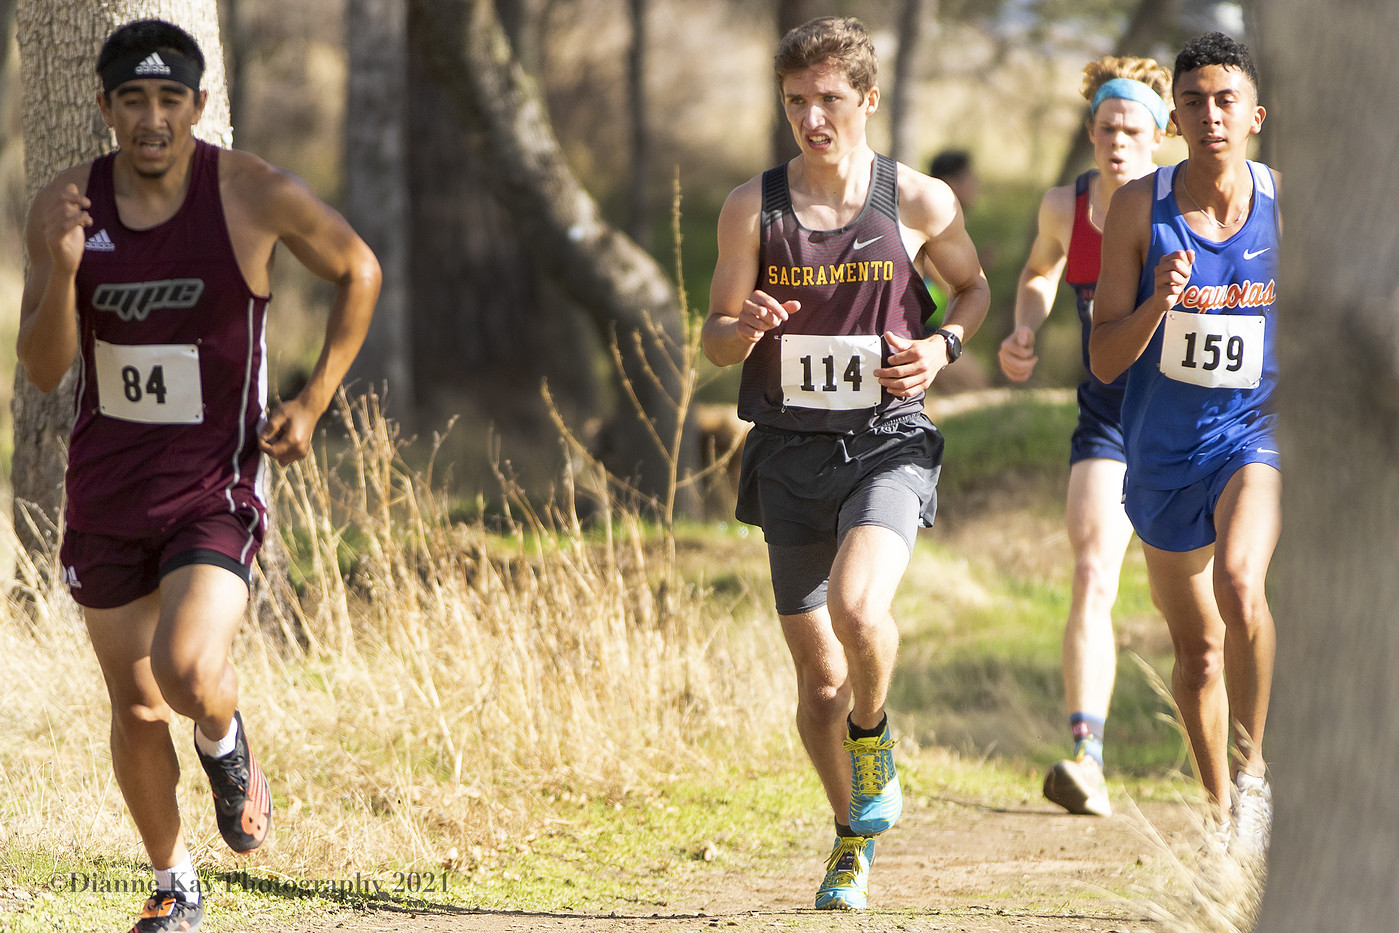 Walker, the lone runner to qualify from SCC, finishes 124th at the State Championships